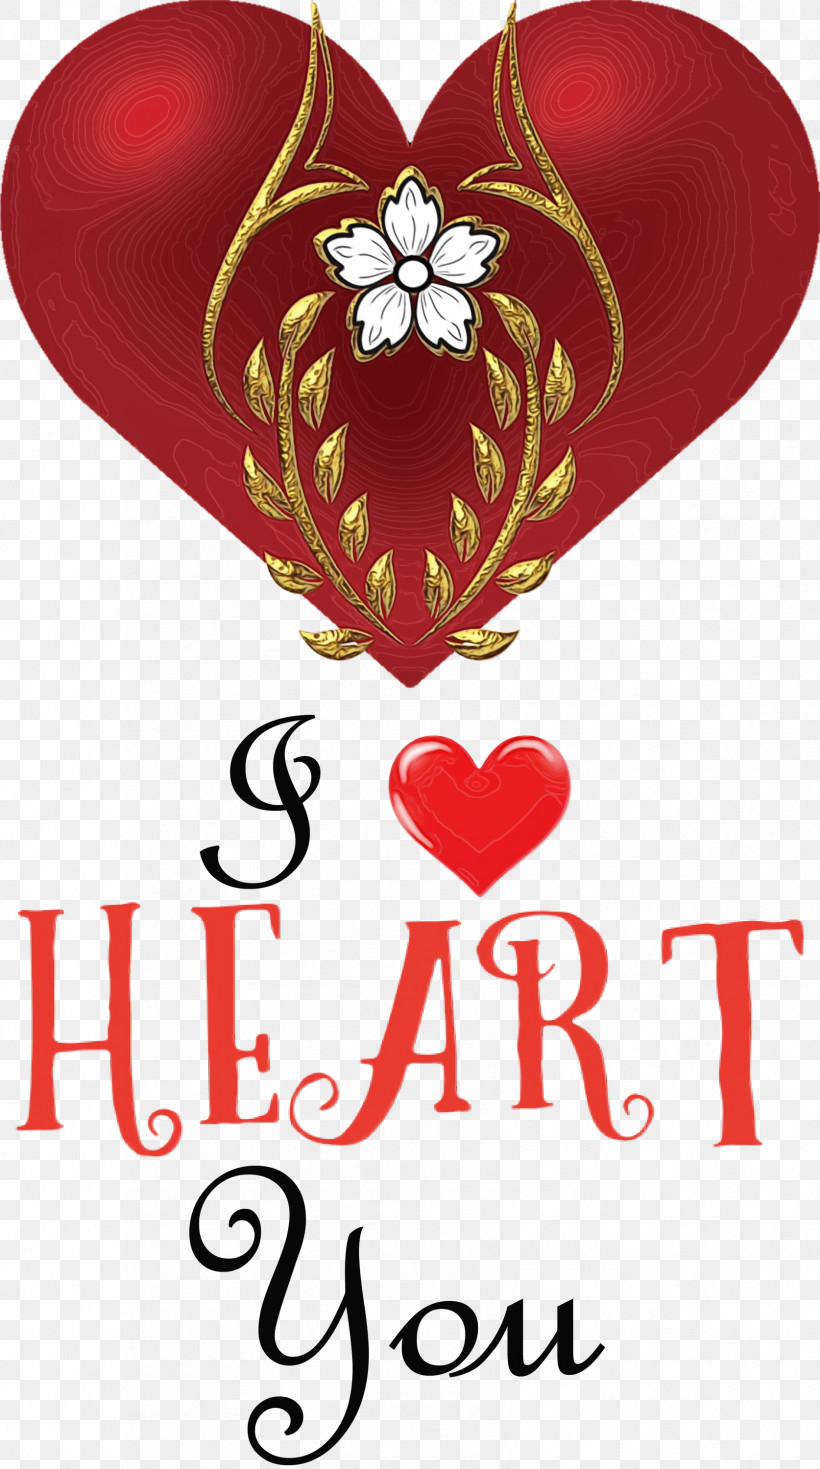 Heart Watercolor Painting Poster 易拉宝 16hearts, PNG, 1674x3000px, I Heart You, Heart, I Love You, Paint, Poster Download Free